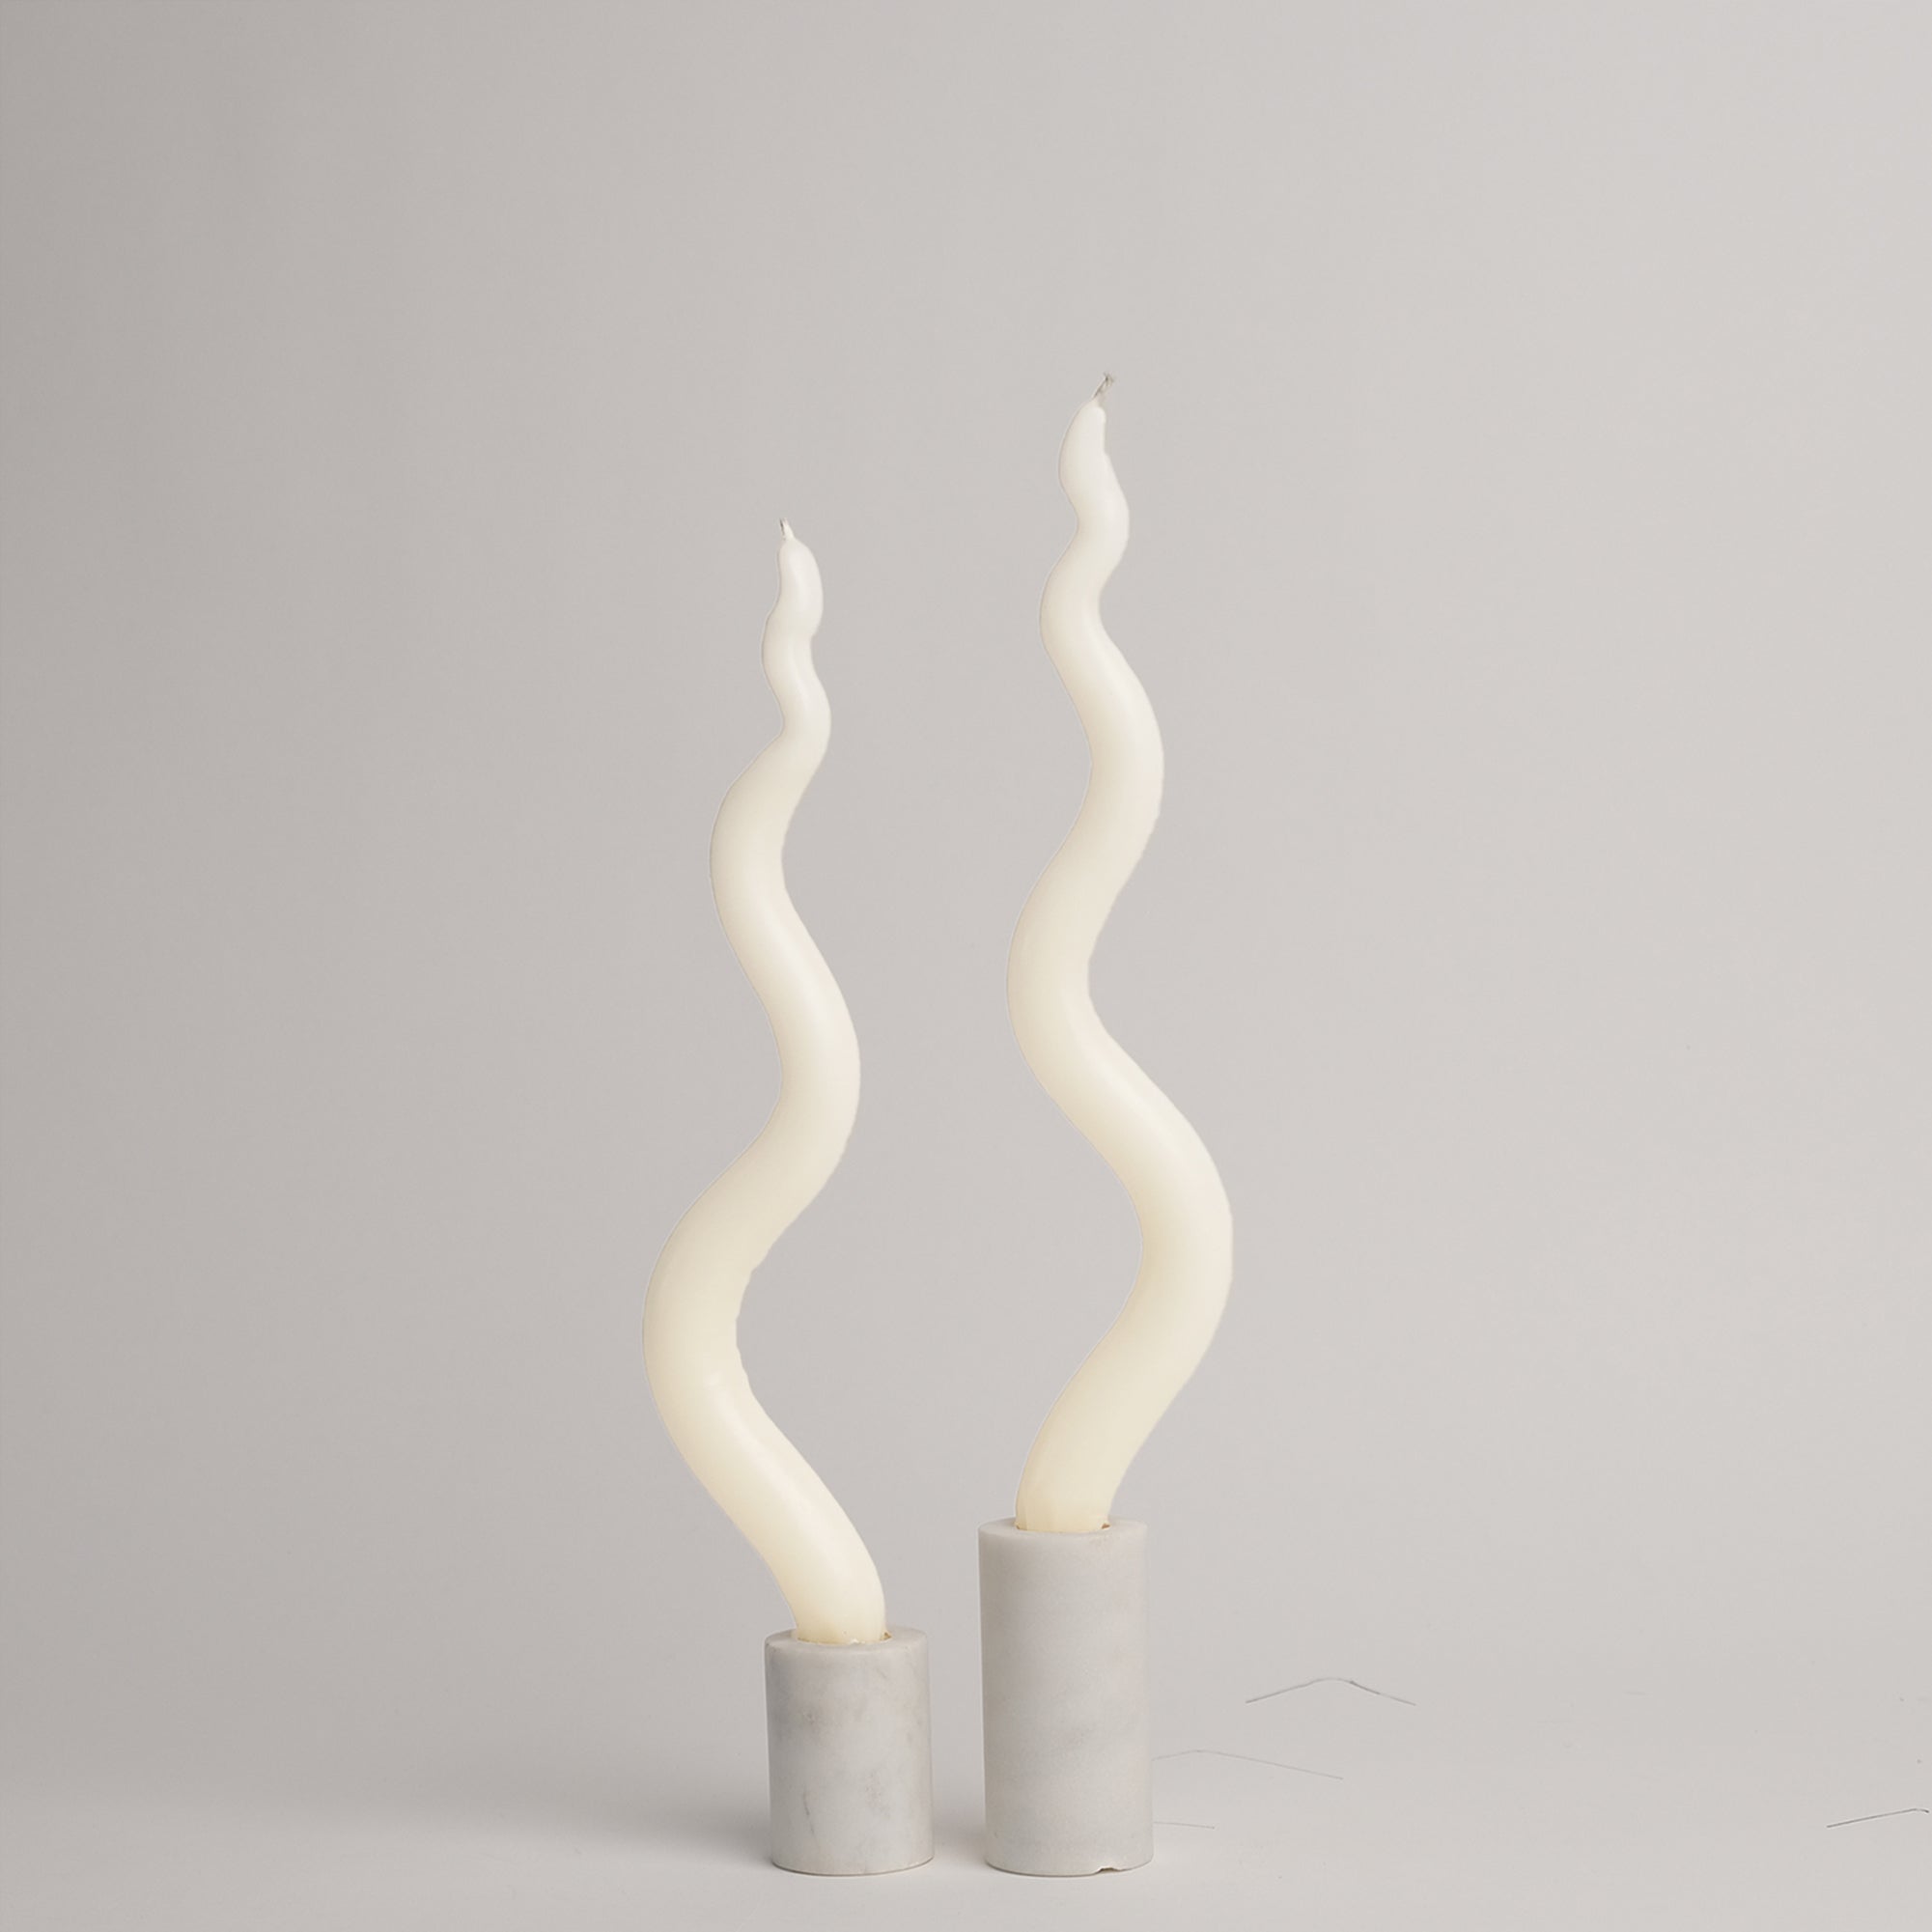 12" Hand Sculpted Squiggle Candle Sticks, Set of 2